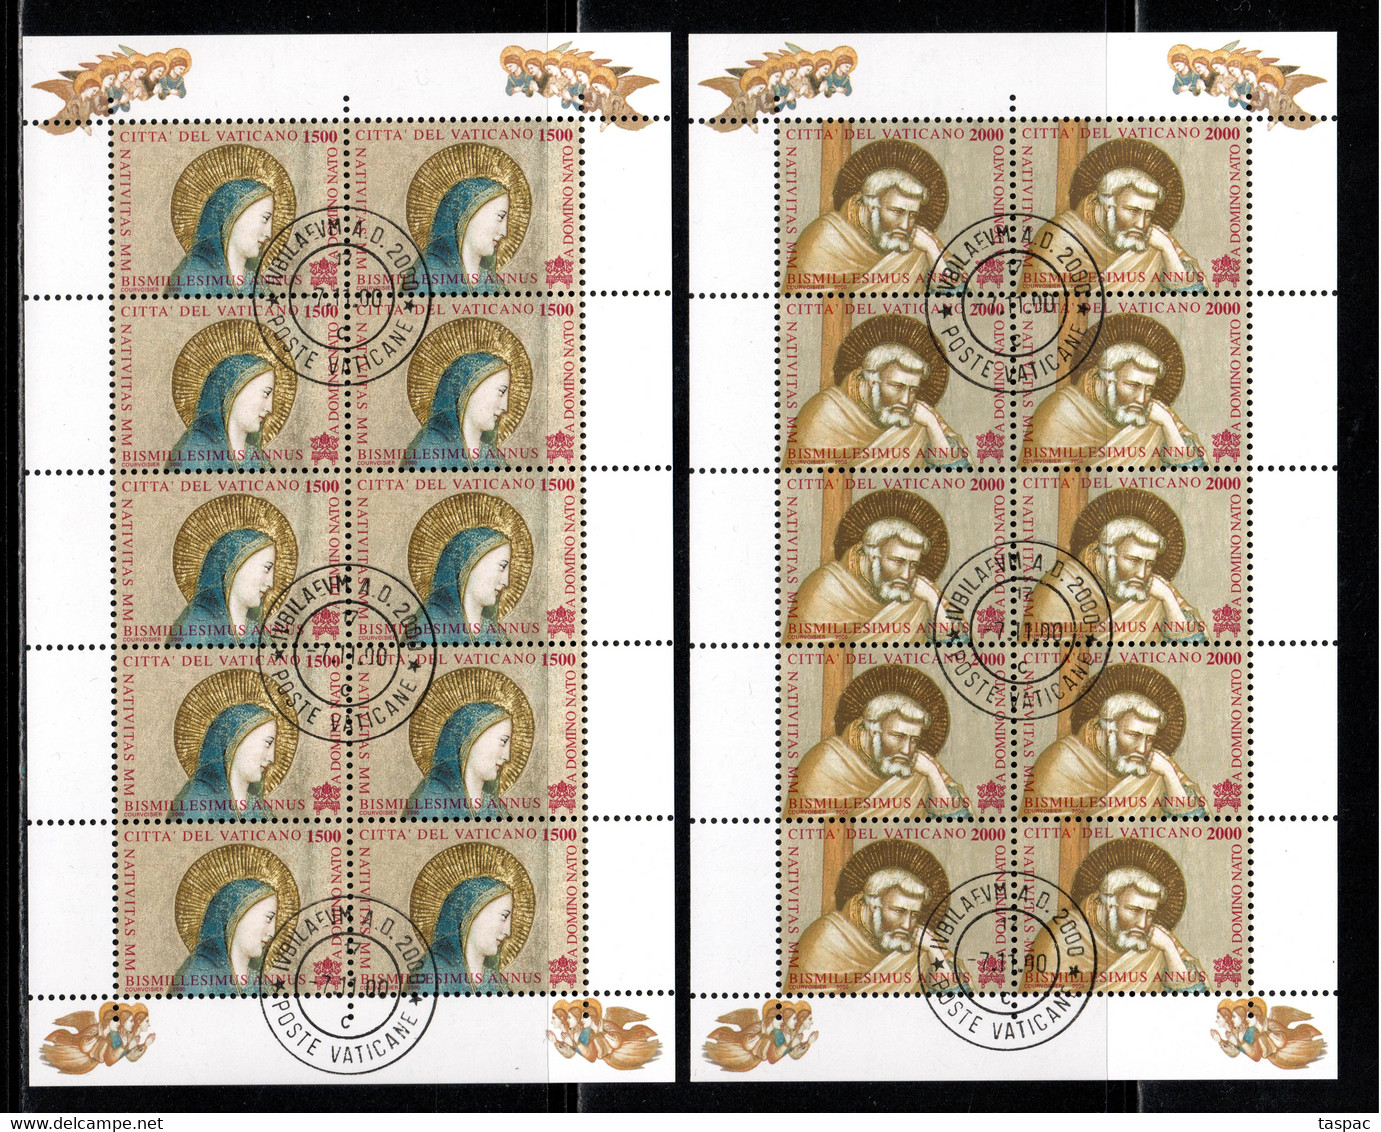 Vatican 2000 Mi# 1358-1361 Klb. Used - 4 Sheets Of 10 (2 X 10) - Christmas / Frescoes In Basilica Of St. Francis - Usados